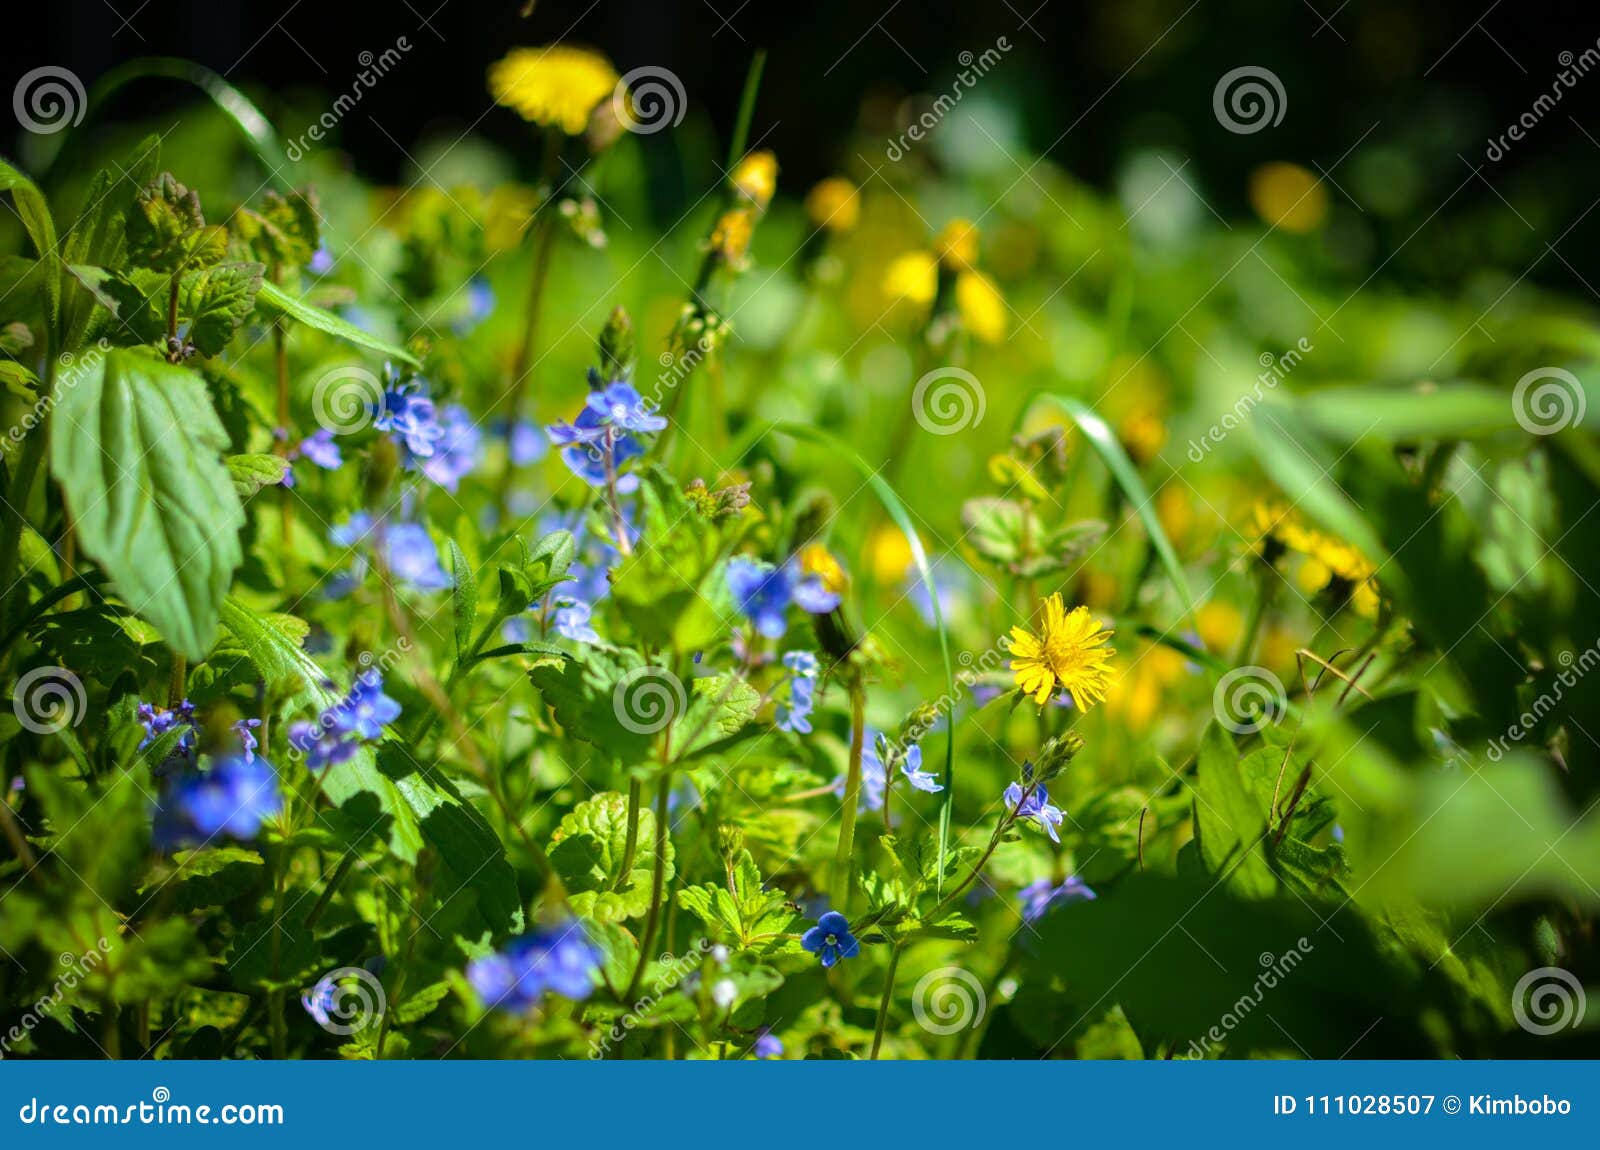 Background with Fresh Blue and Yellow Spring Flowers Stock Image ...